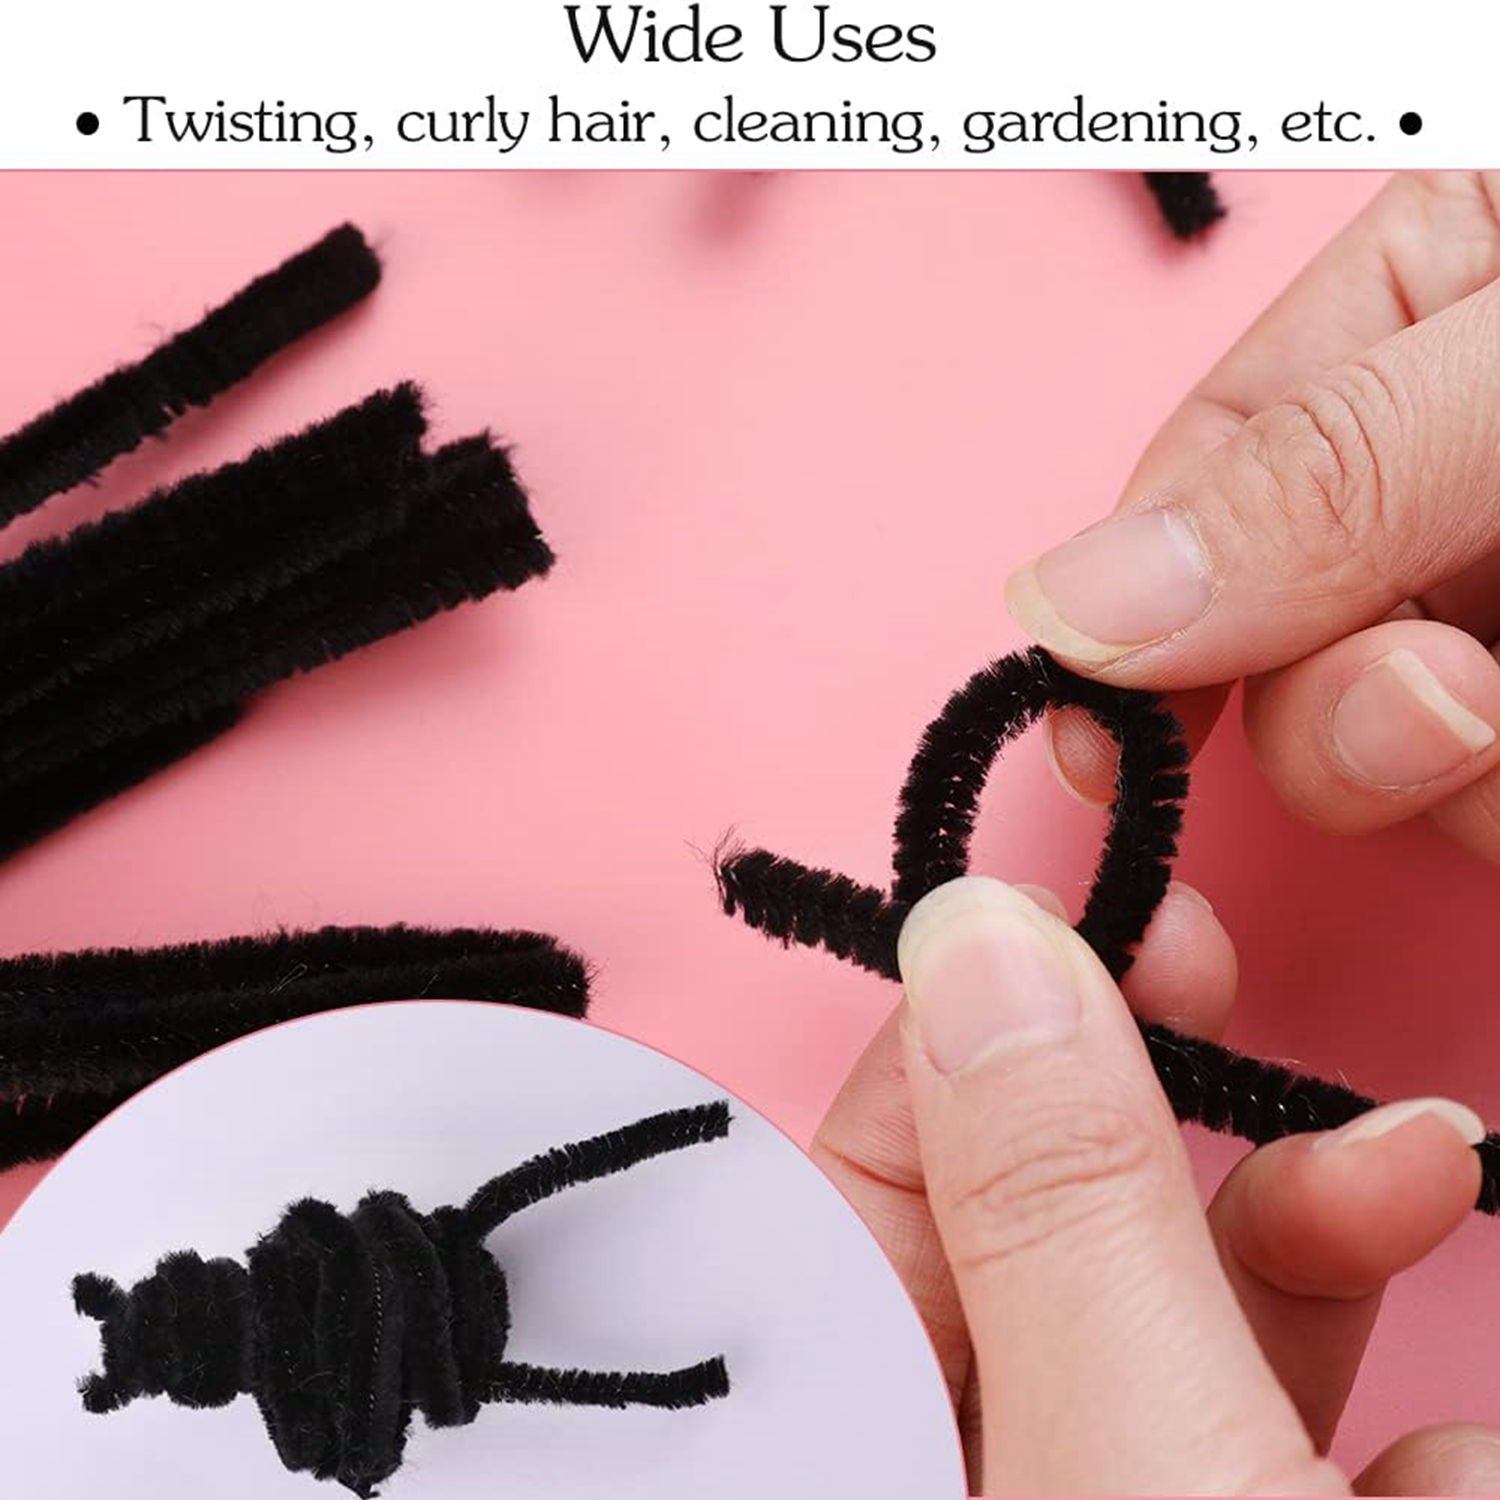 Bulk Pink Pipe Cleaners - Pipe Cleaners - Craft Basics - Kids